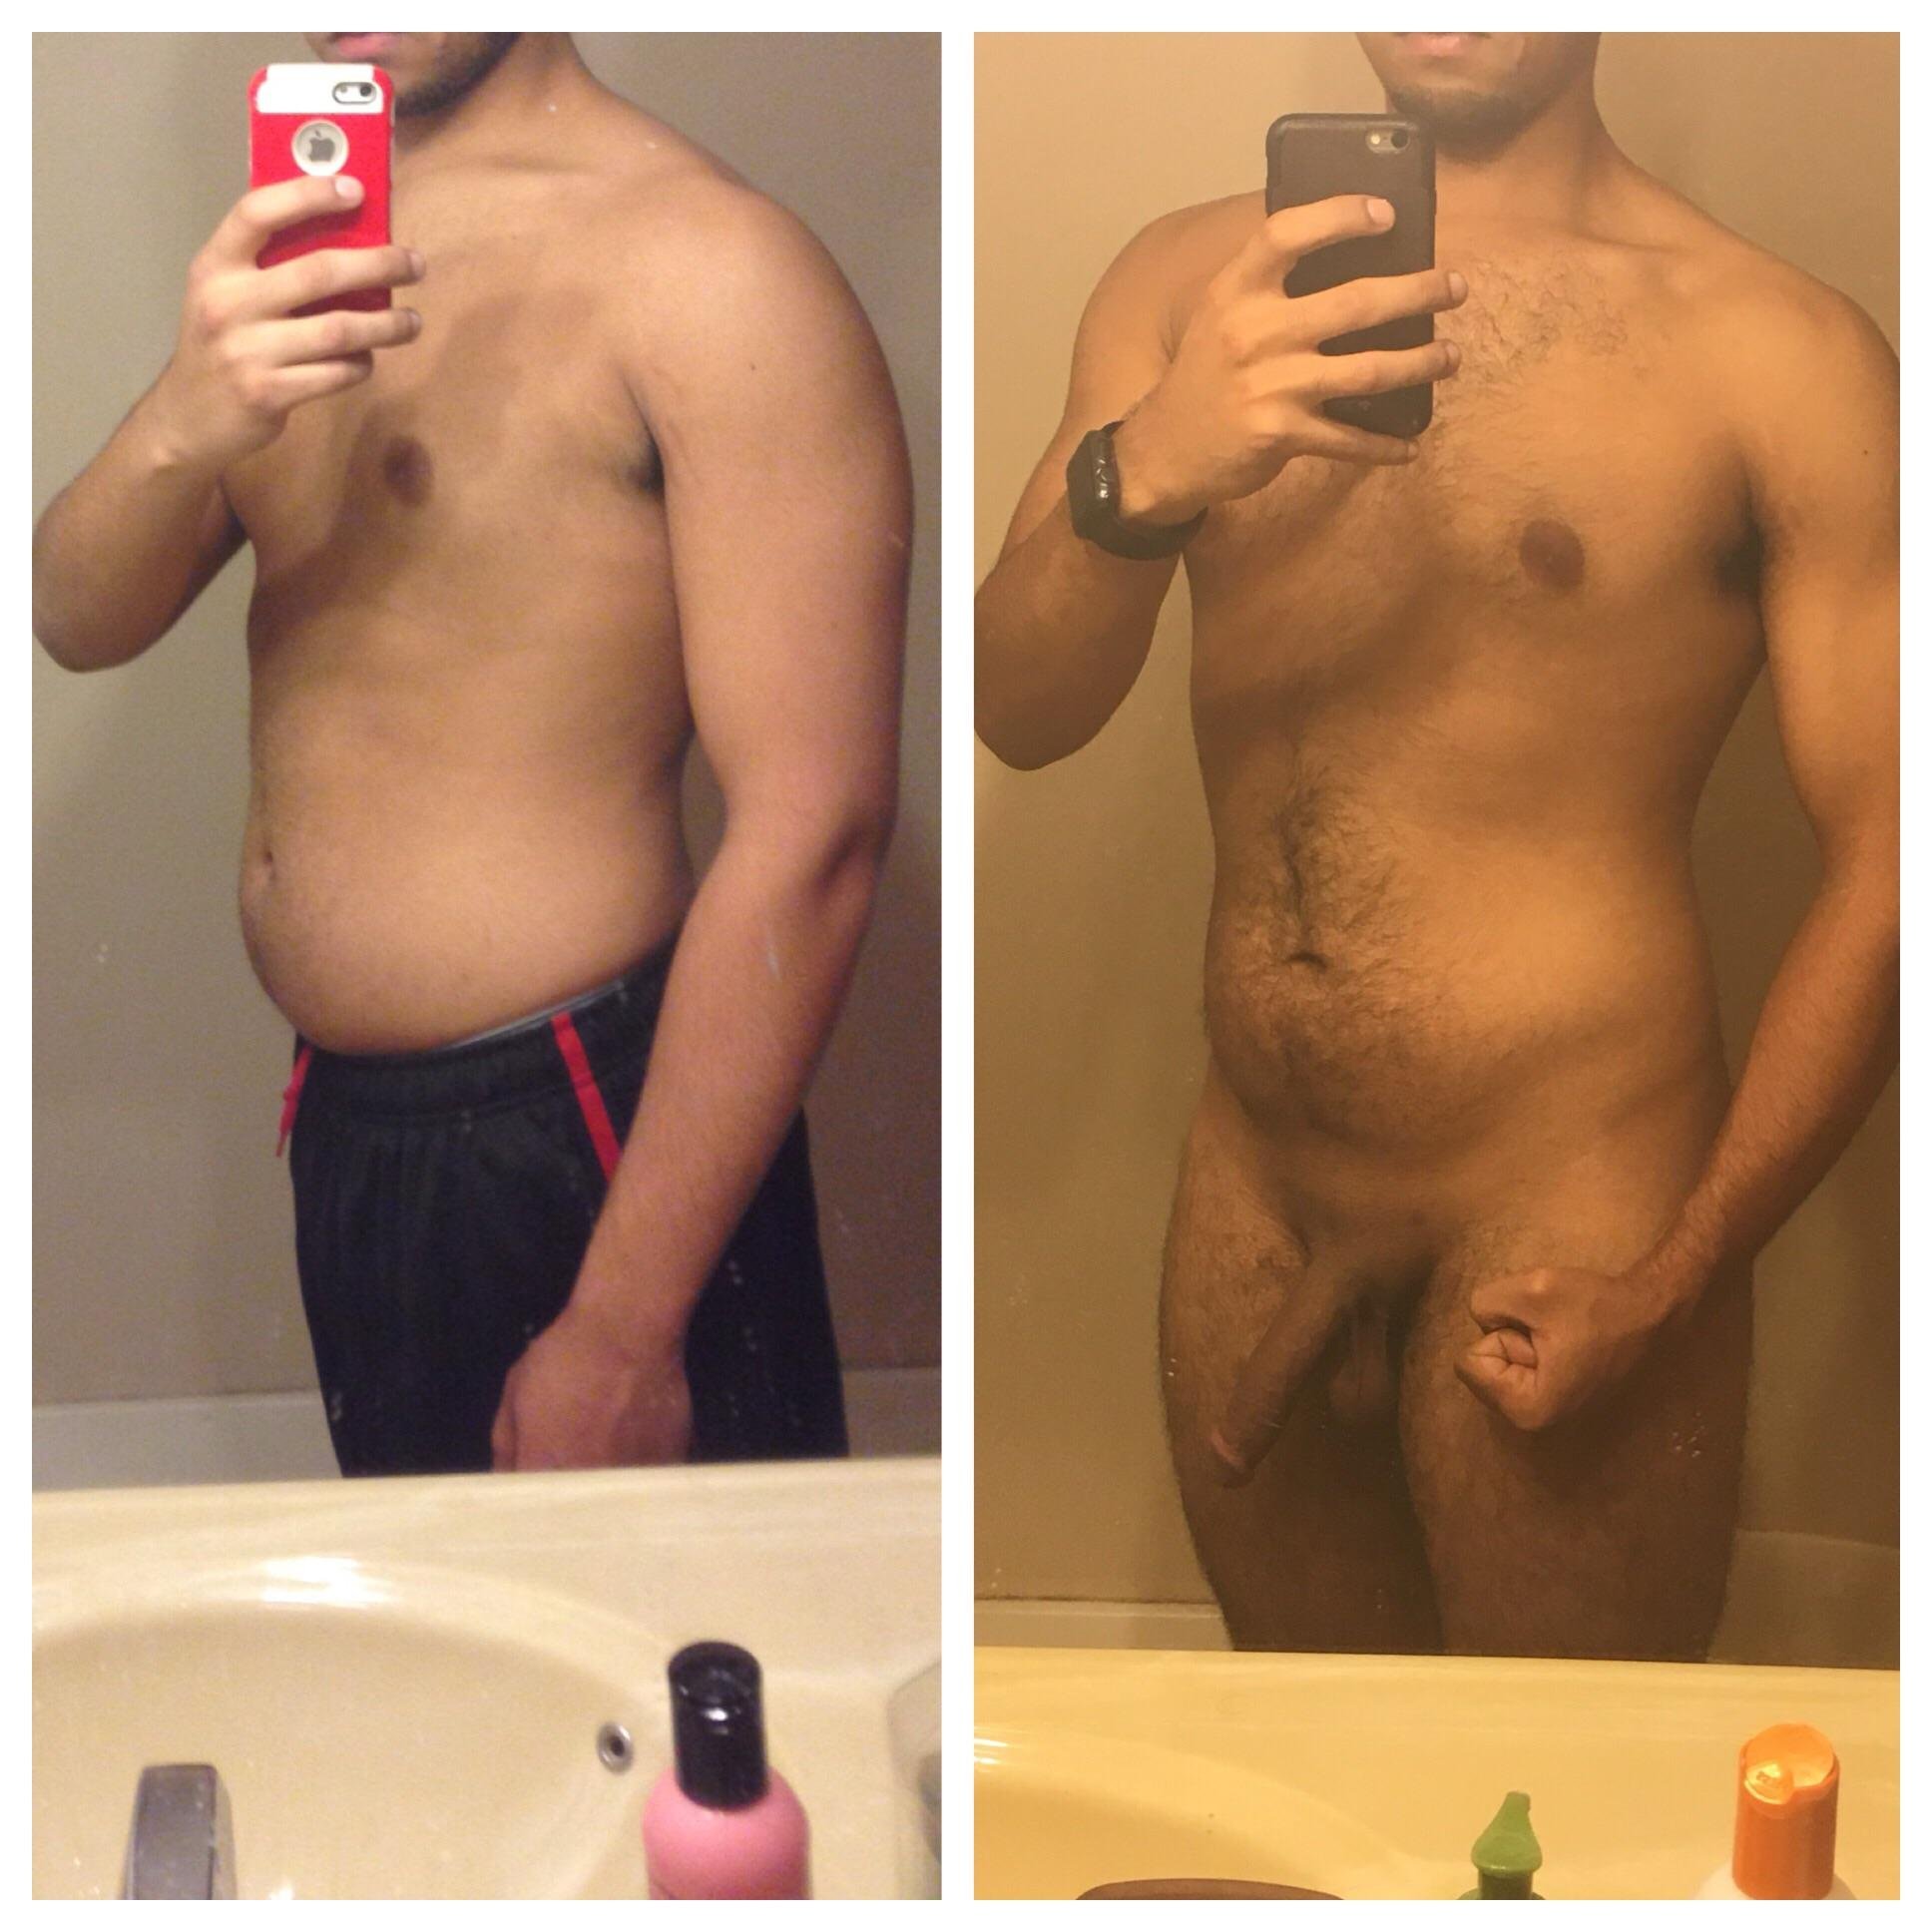 M/18y/5’9”, 197 LBS ~~~ 20y/5’9”, 165 LBS. Down 32 lbs from two years ago, would like to gain 15 lbs of muscle now.